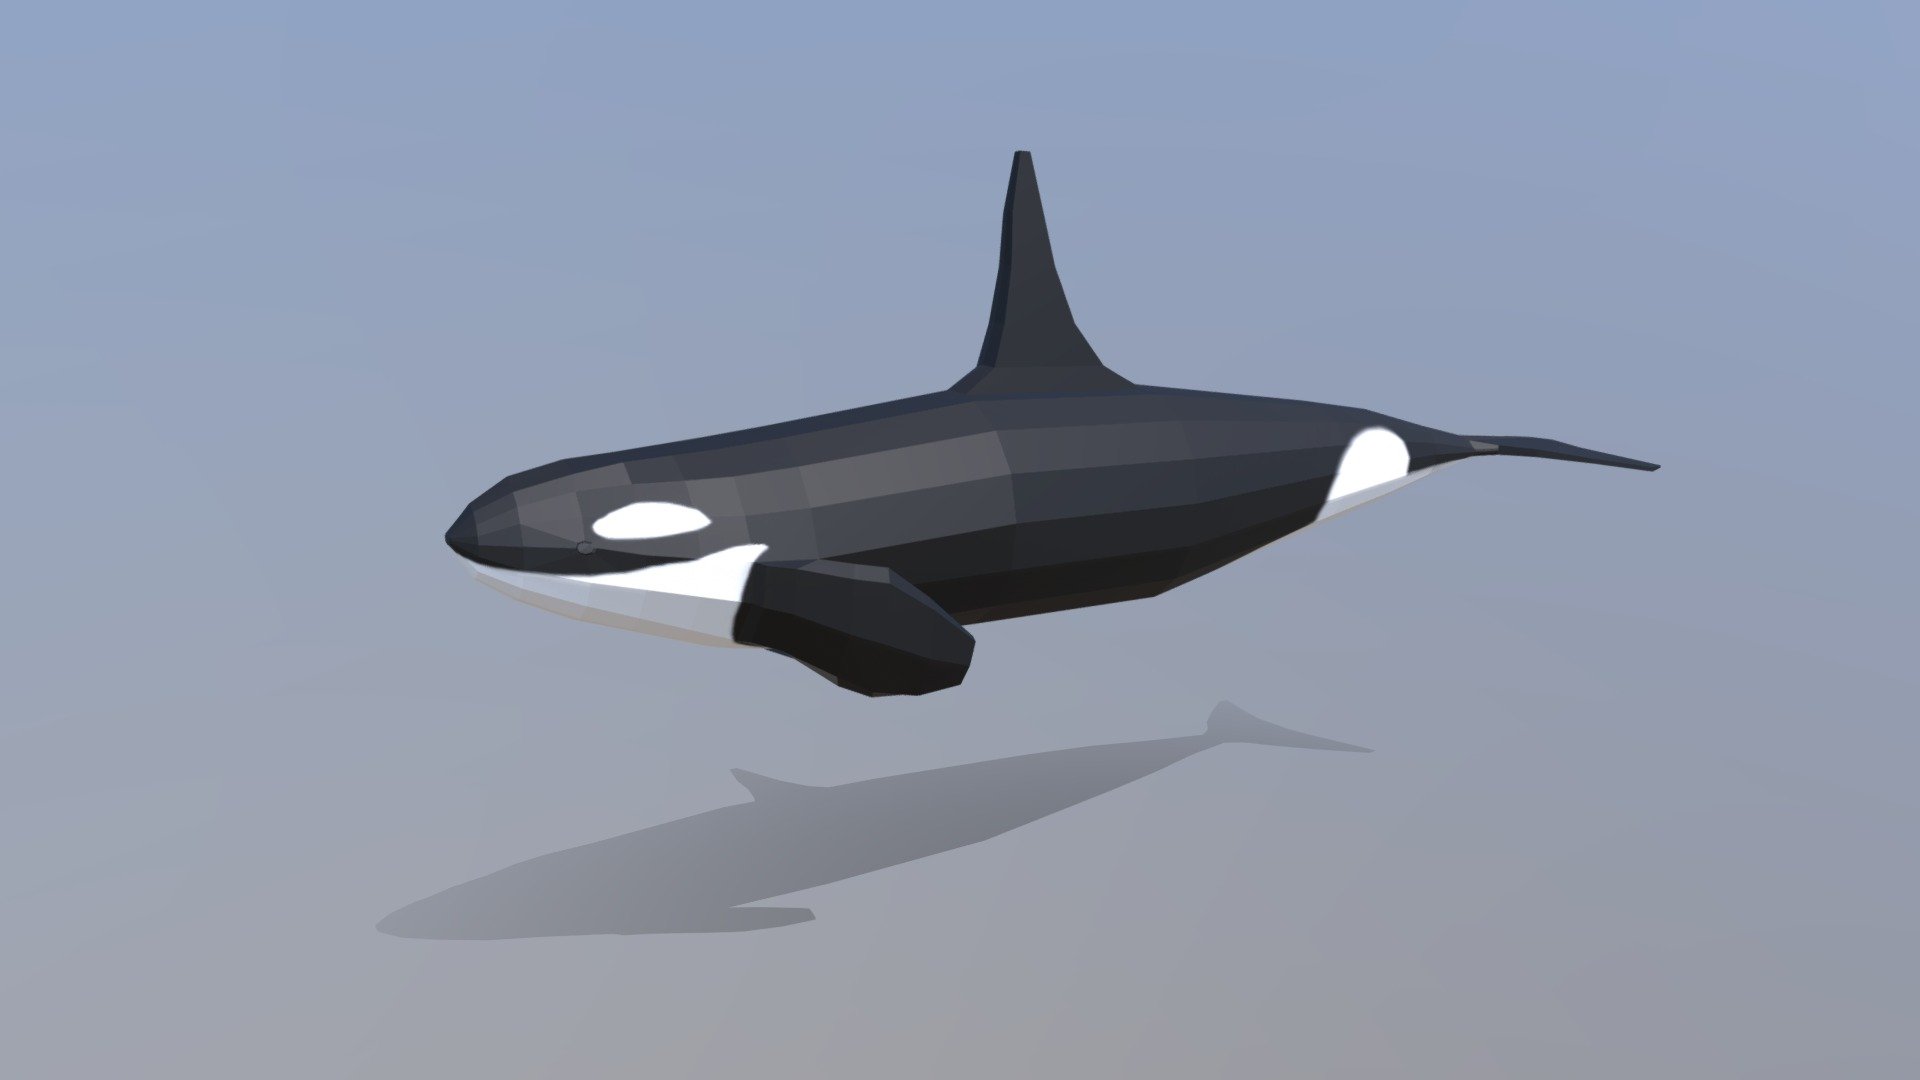 This is a low poly 3d model of an orca. The low poly orca was modeled and prepared for low-poly style renderings, background, general CG visualization presented as a mesh with quads only.

Verts : 576 Faces: 574

Hand painted texture is included, UV unwrap and mapping is available

The original file was created in blender. You will receive a 3DS, OBJ, FBX, blend, DAE, STL.

Warning: Depending on which software package you are using, the exchange formats (.obj, .3ds, .dae .fbx) may not match the preview images exactly. Due to the nature of these formats, there may be some textures that have to be loaded by hand and possibly triangulated geometry.

All preview images were rendered with Blender Cycles. Product is ready to render out-of-the-box. Please note that the lights, cameras, and background is only included in the .blend file. The model is clean and alone in the other provided files, centered at origin and has real-world scale 3d model